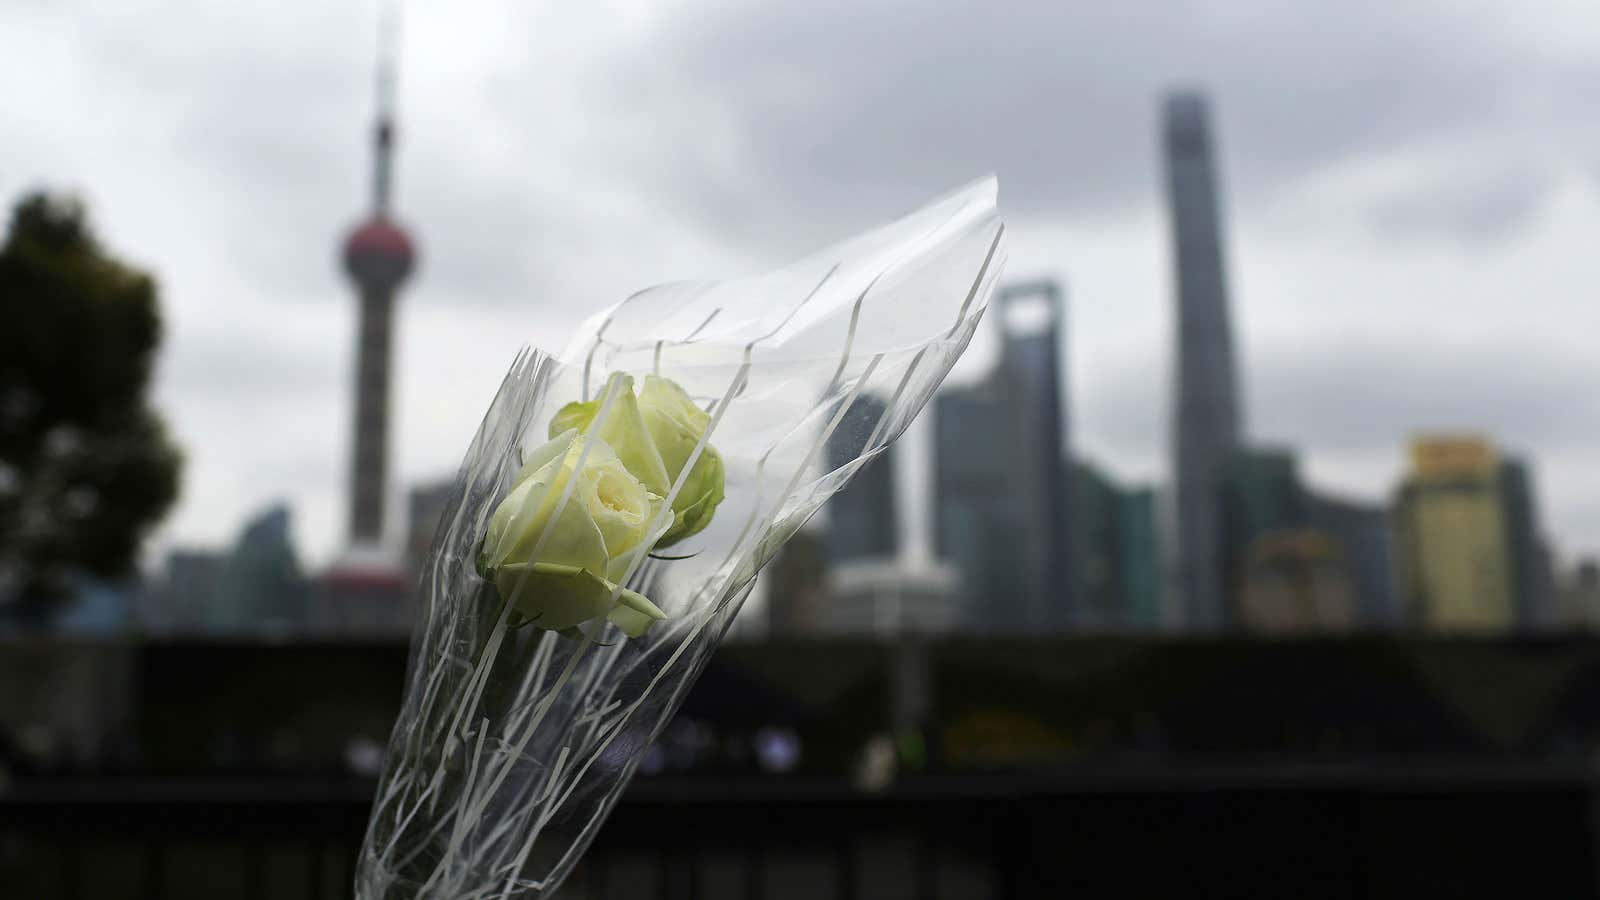 A memorial at the site of a New Year’s Eve stampede in Shanghai.